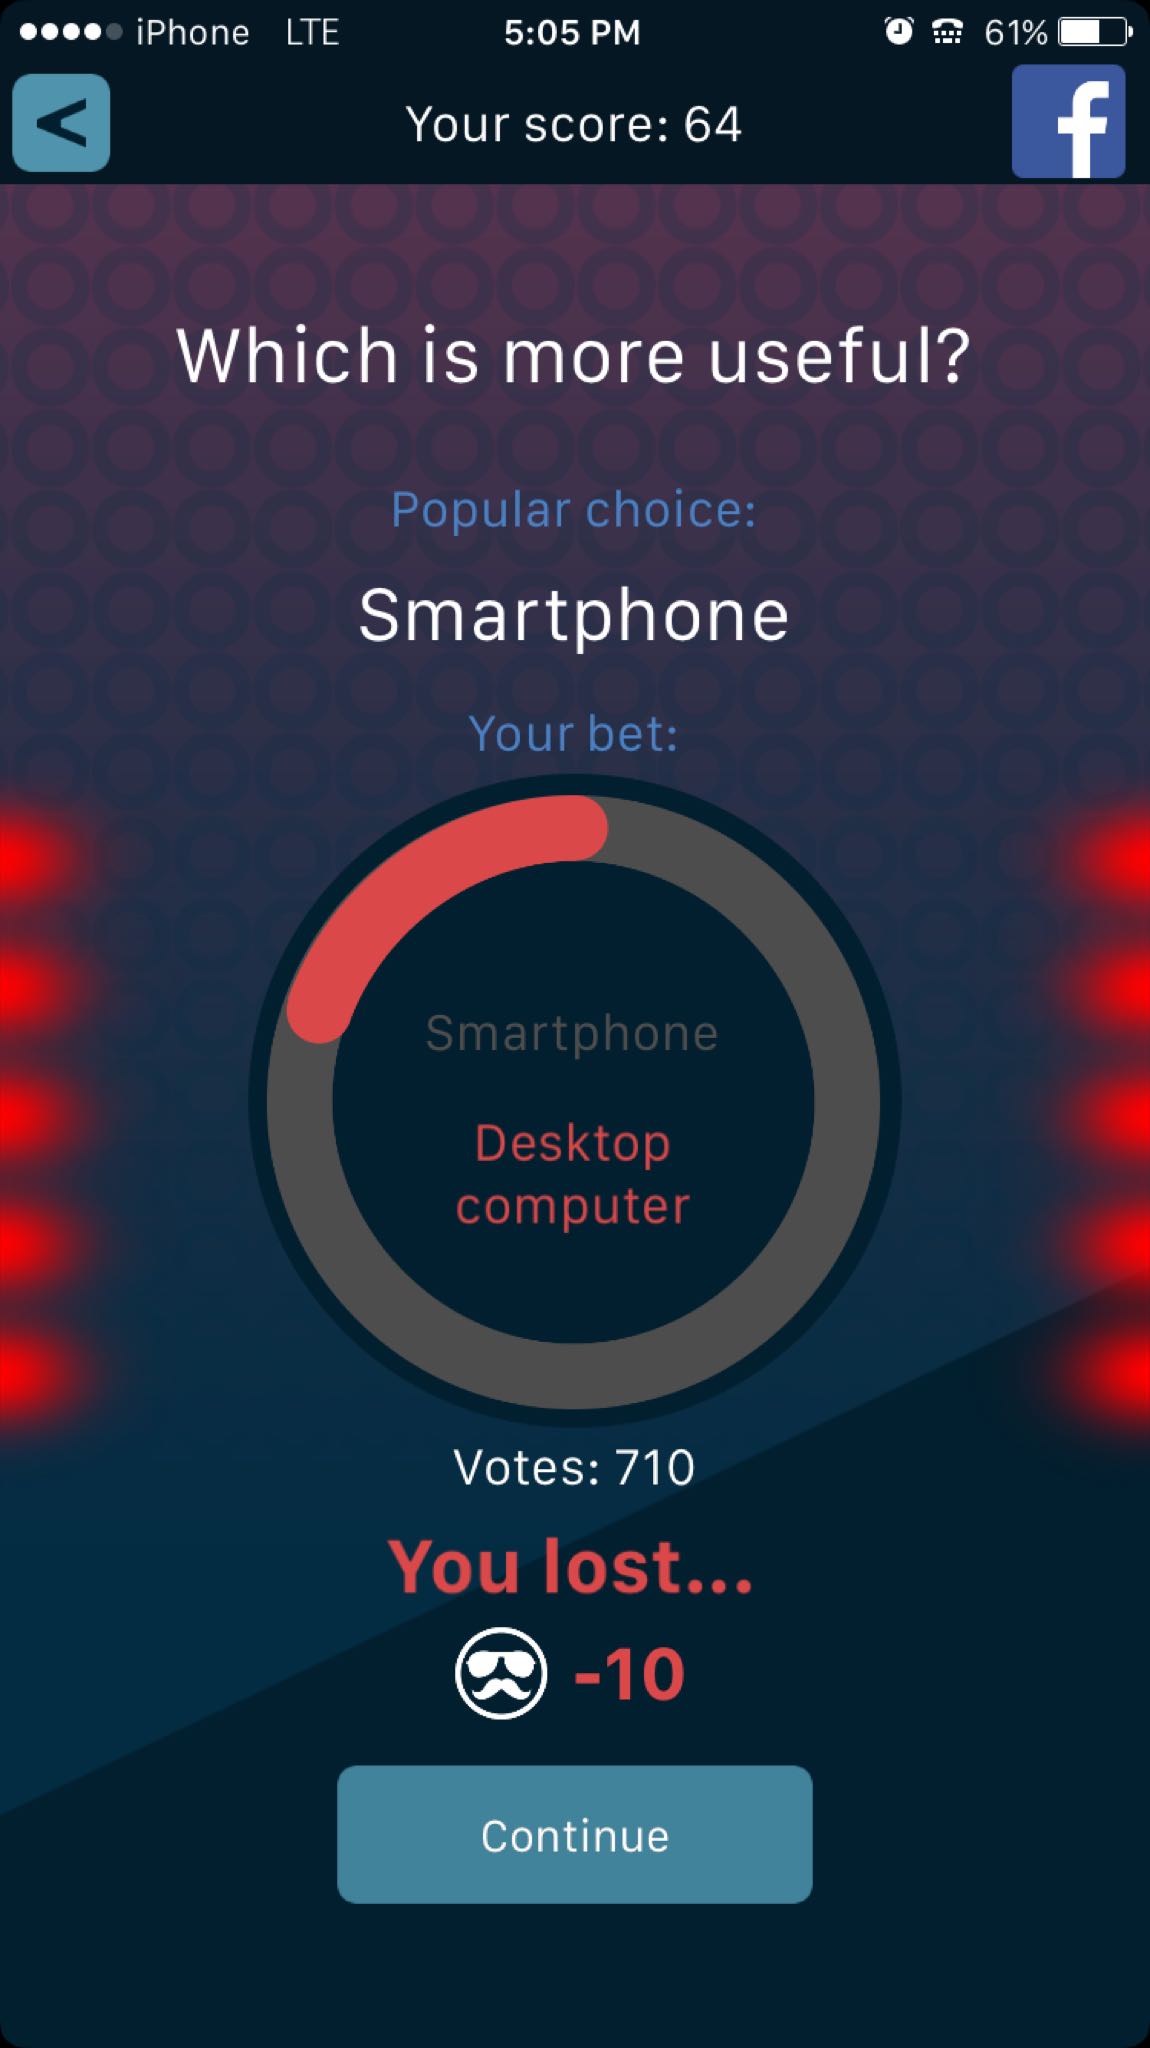 Apparently smartphones are more useful than desktop computers...